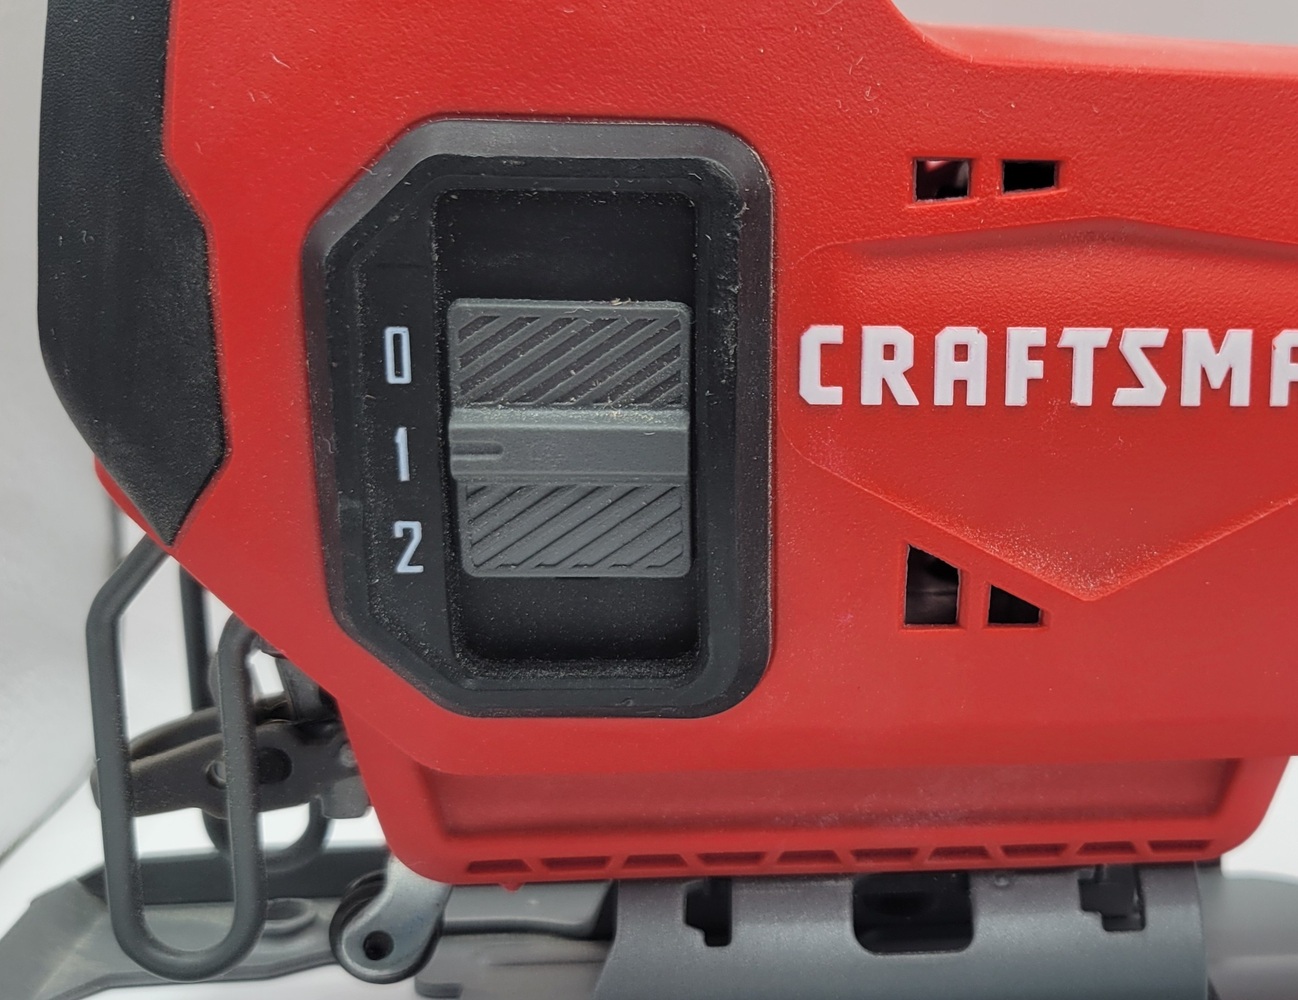 Craftsman 20V Variable Speed Jigsaw & 2.0AH Lithium Ion Battery